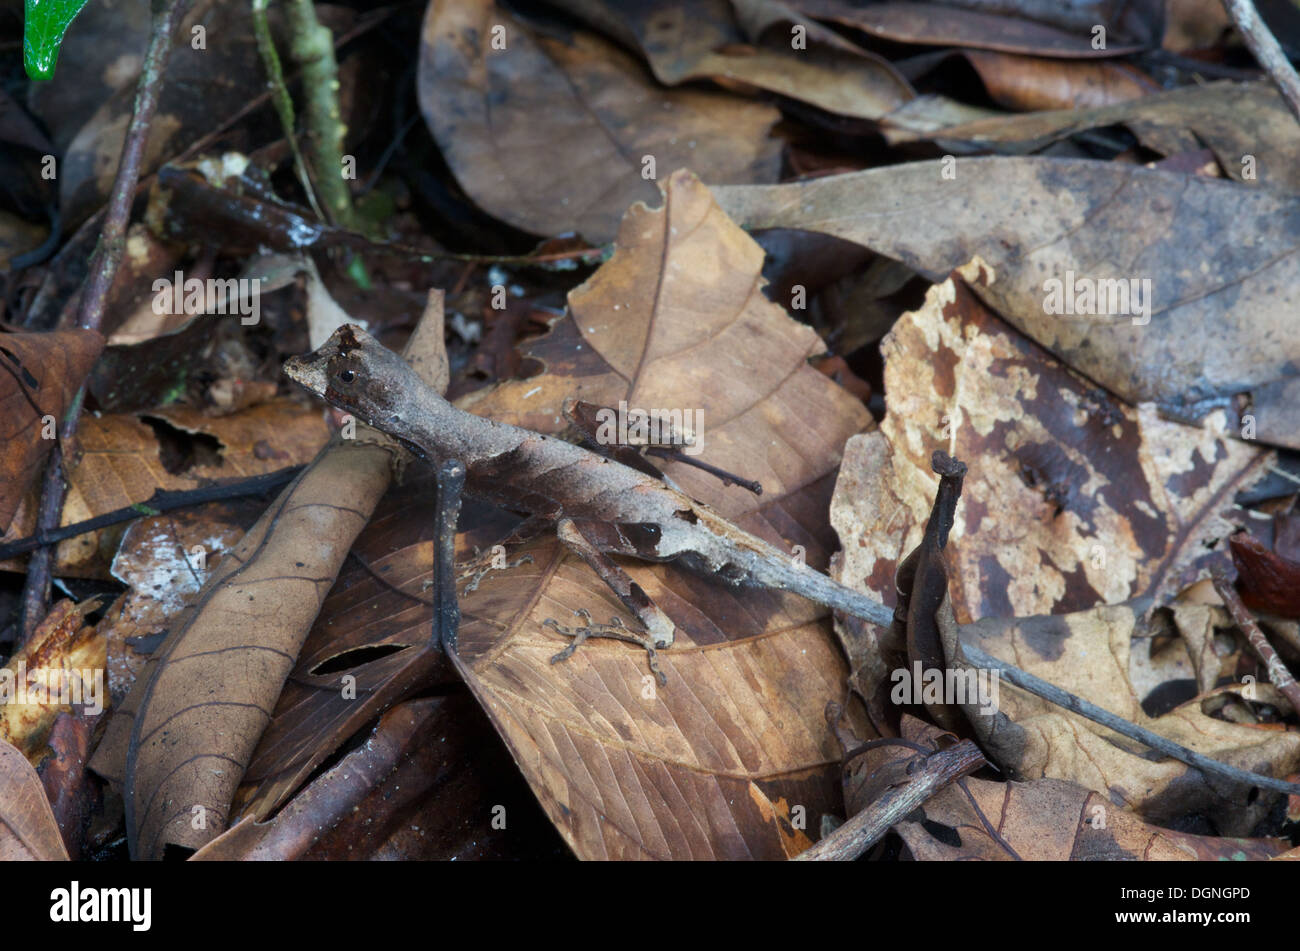 A Blue-lipped Forest Anole (Anolis bombiceps) camouflaged on the forest floor in the Amazon rainforest in Loreto, Peru. Stock Photo